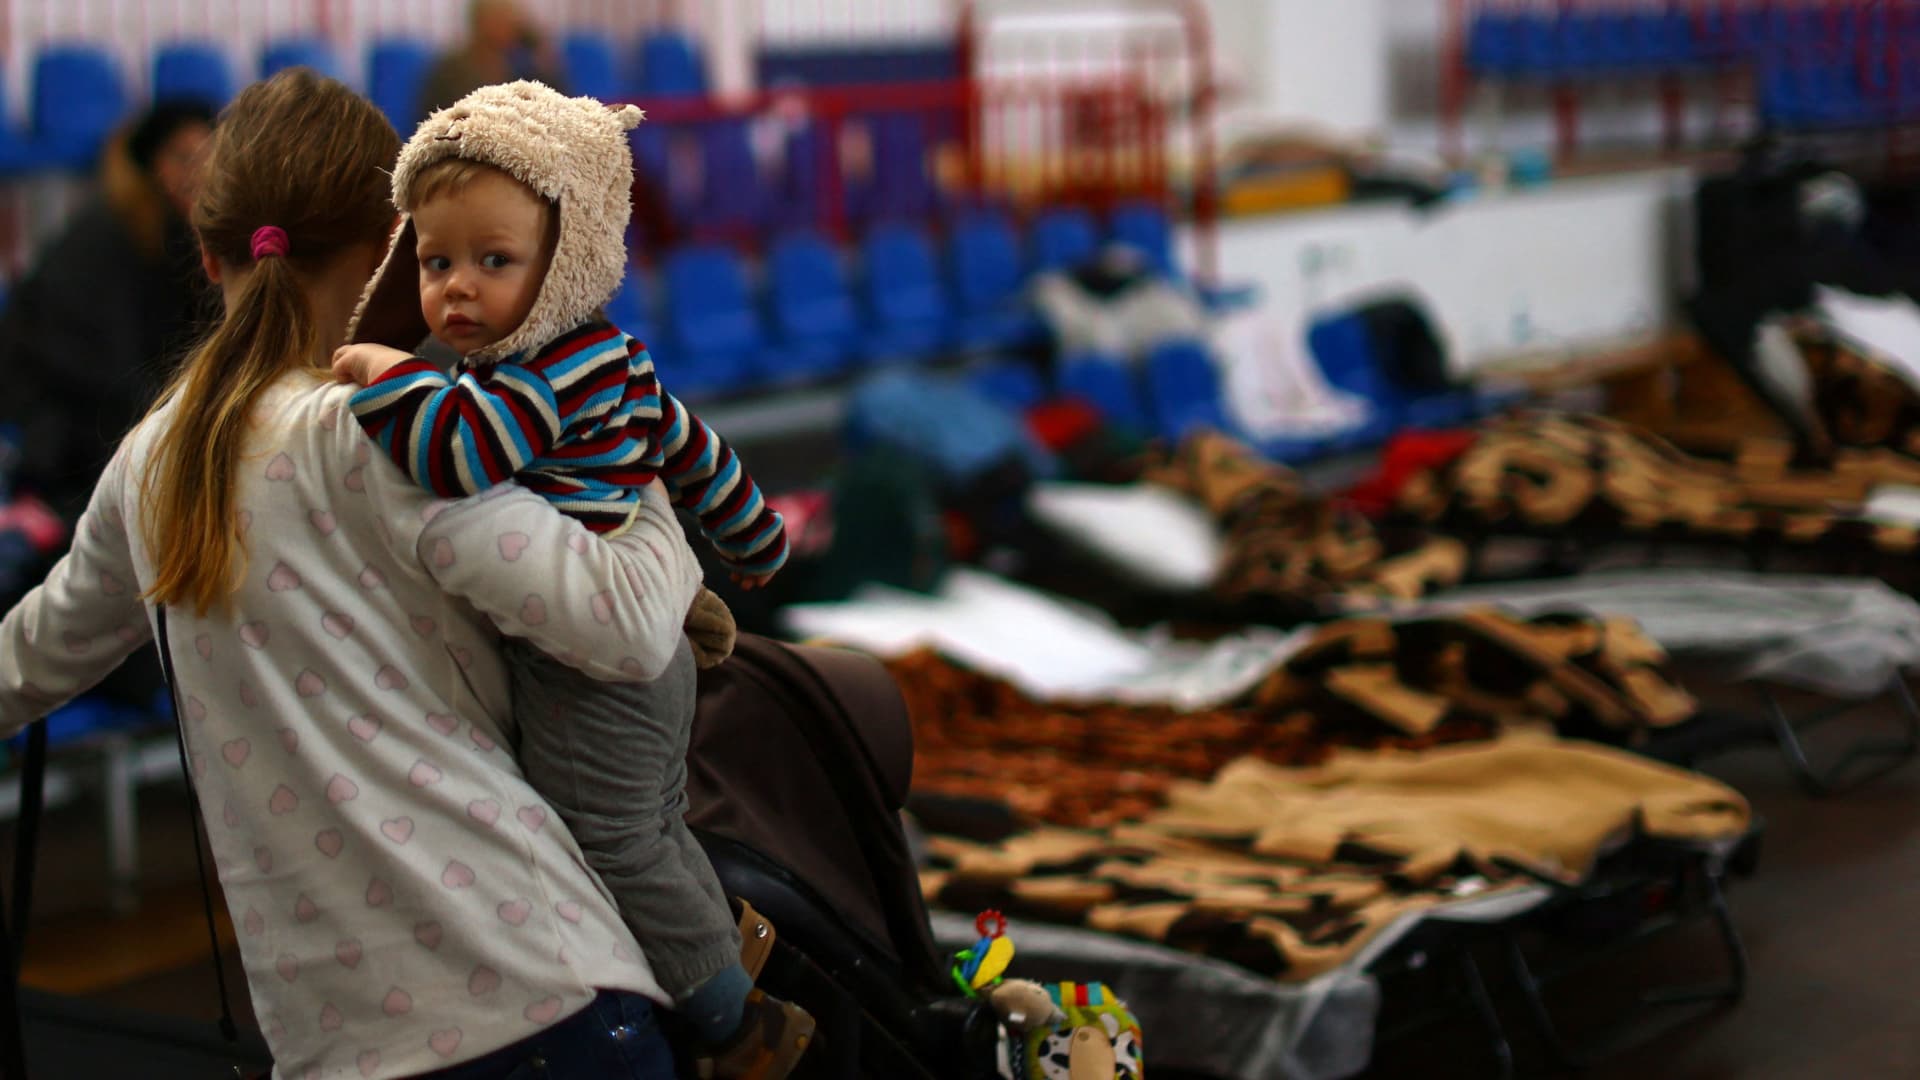 A mother with her child arrives at a sports hall of a primary school, transformed into temporary accommodation for people fleeing the Russian invasion of Ukraine, in Przemysl, Poland, March 19, 2022.